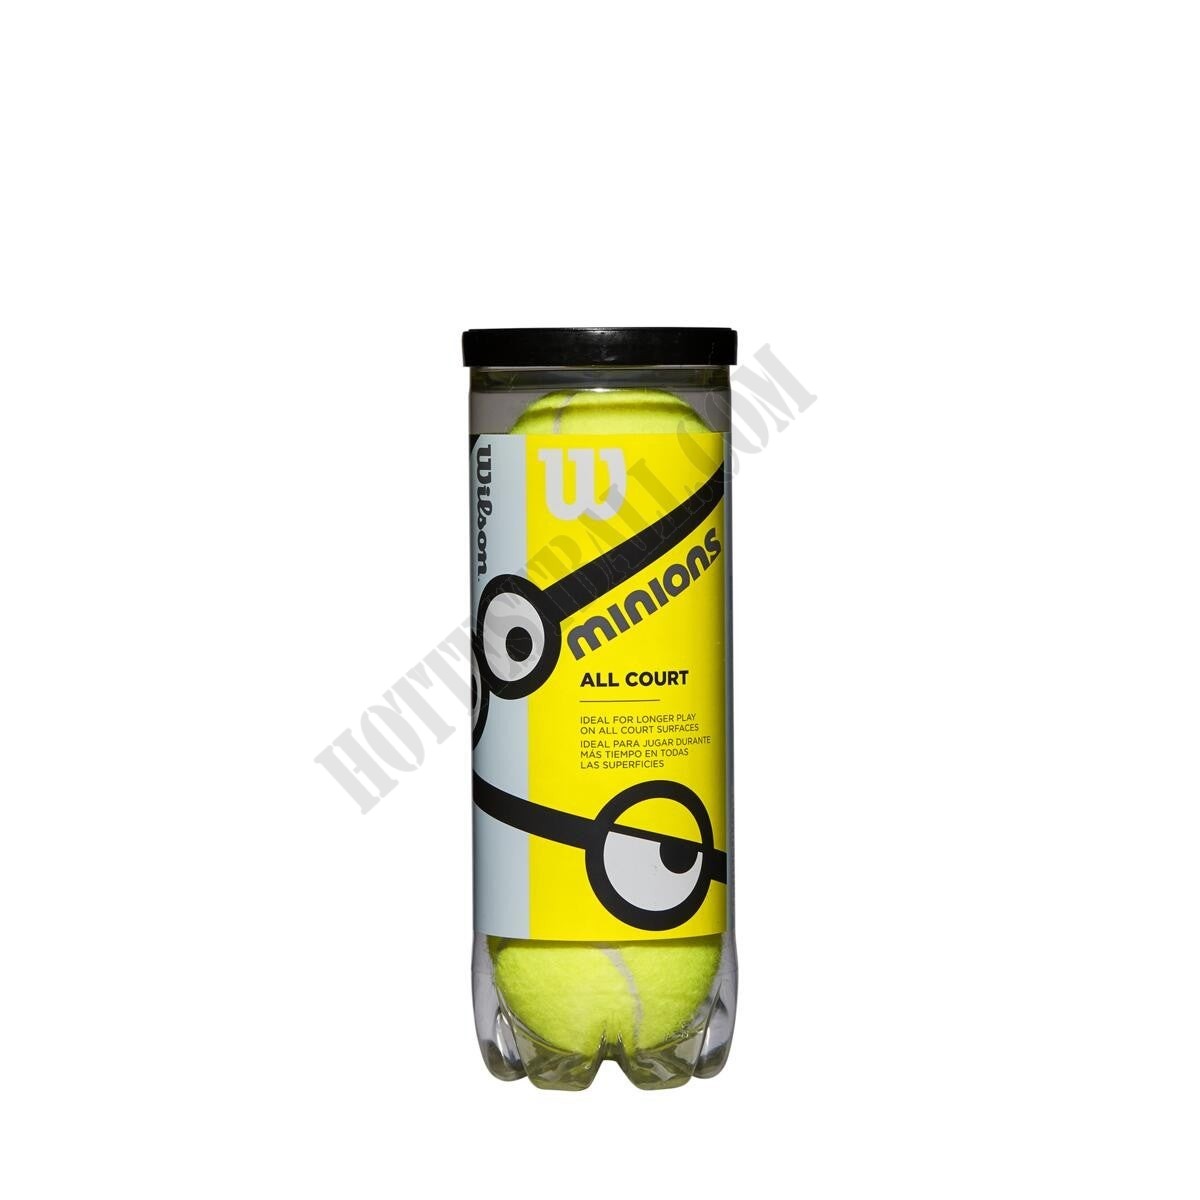 Minions Stage 1 Tennis BCan - Wilson Discount Store - Minions Stage 1 Tennis BCan - Wilson Discount Store